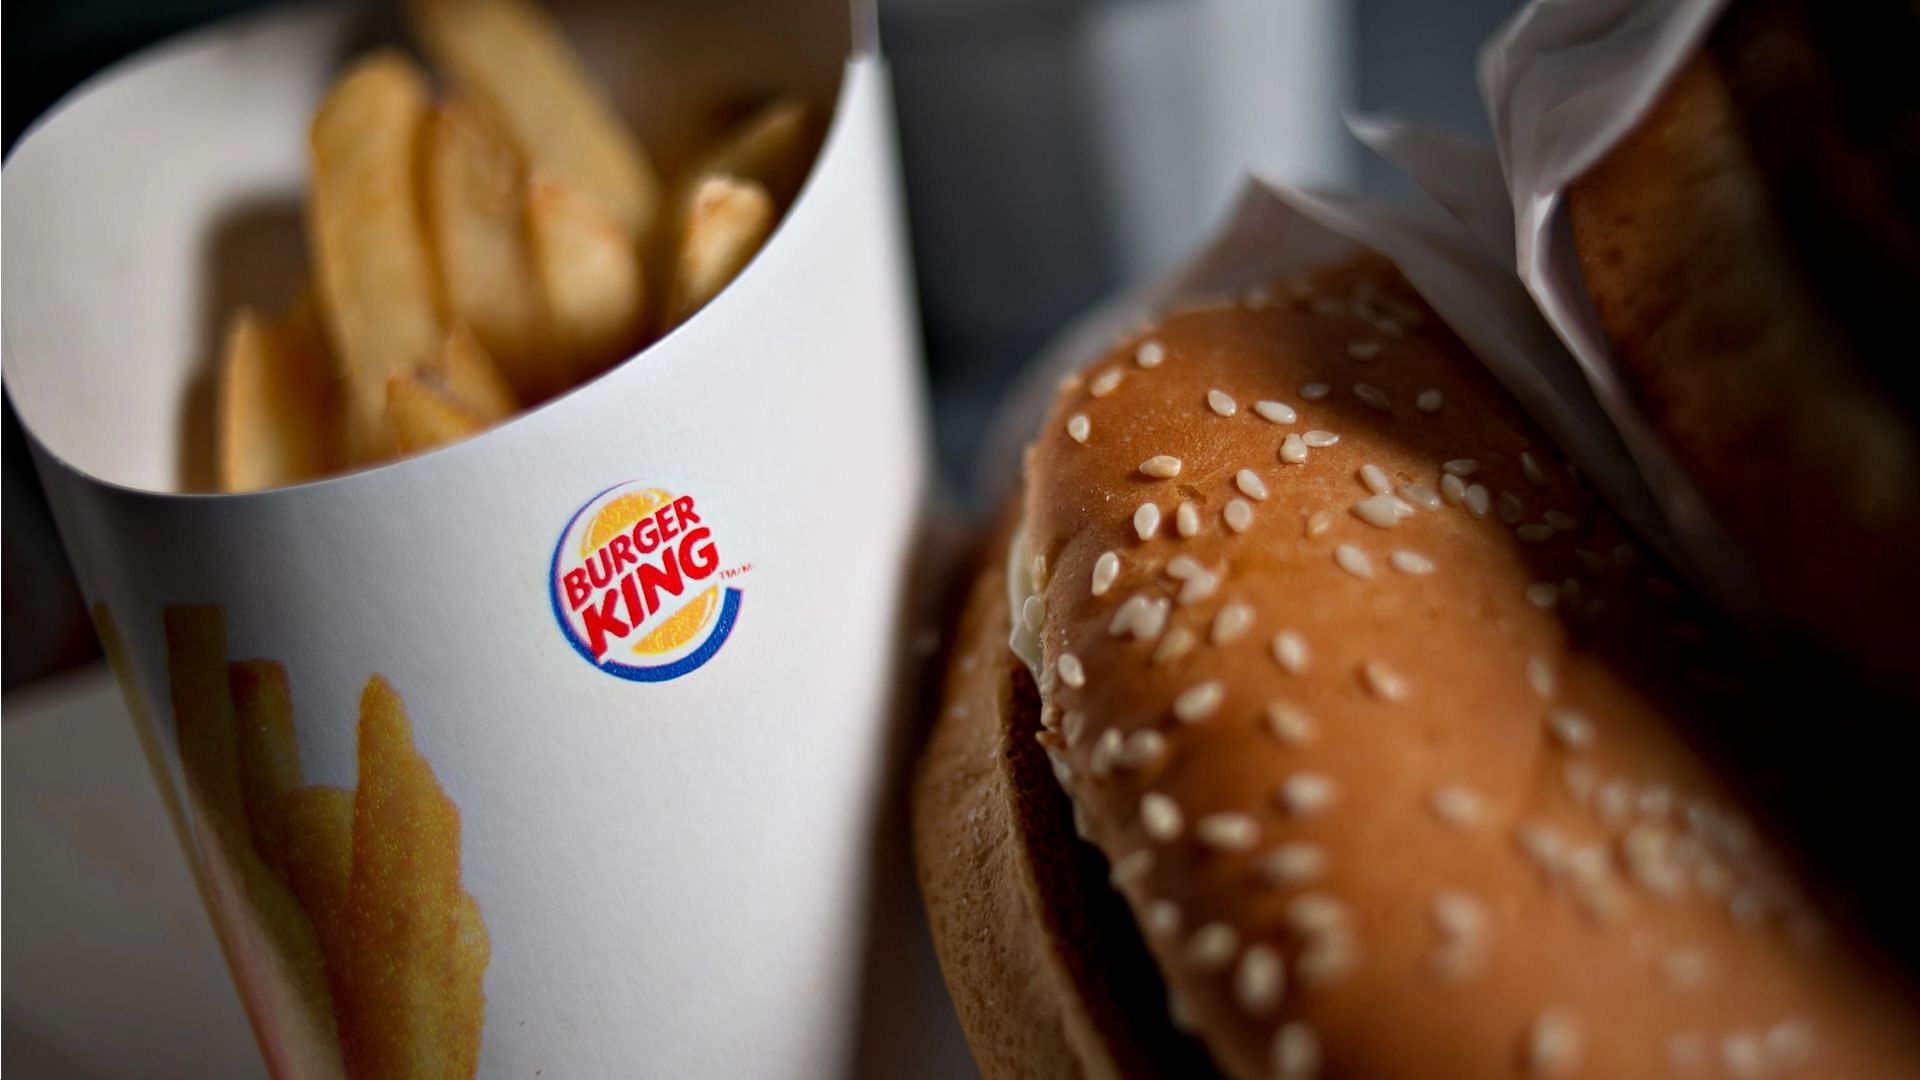 Over 26 Burger King restaurants in the Michigan area are to be shuttered down following unforeseen business circumstances (Image via Bloomberg/Getty Images)